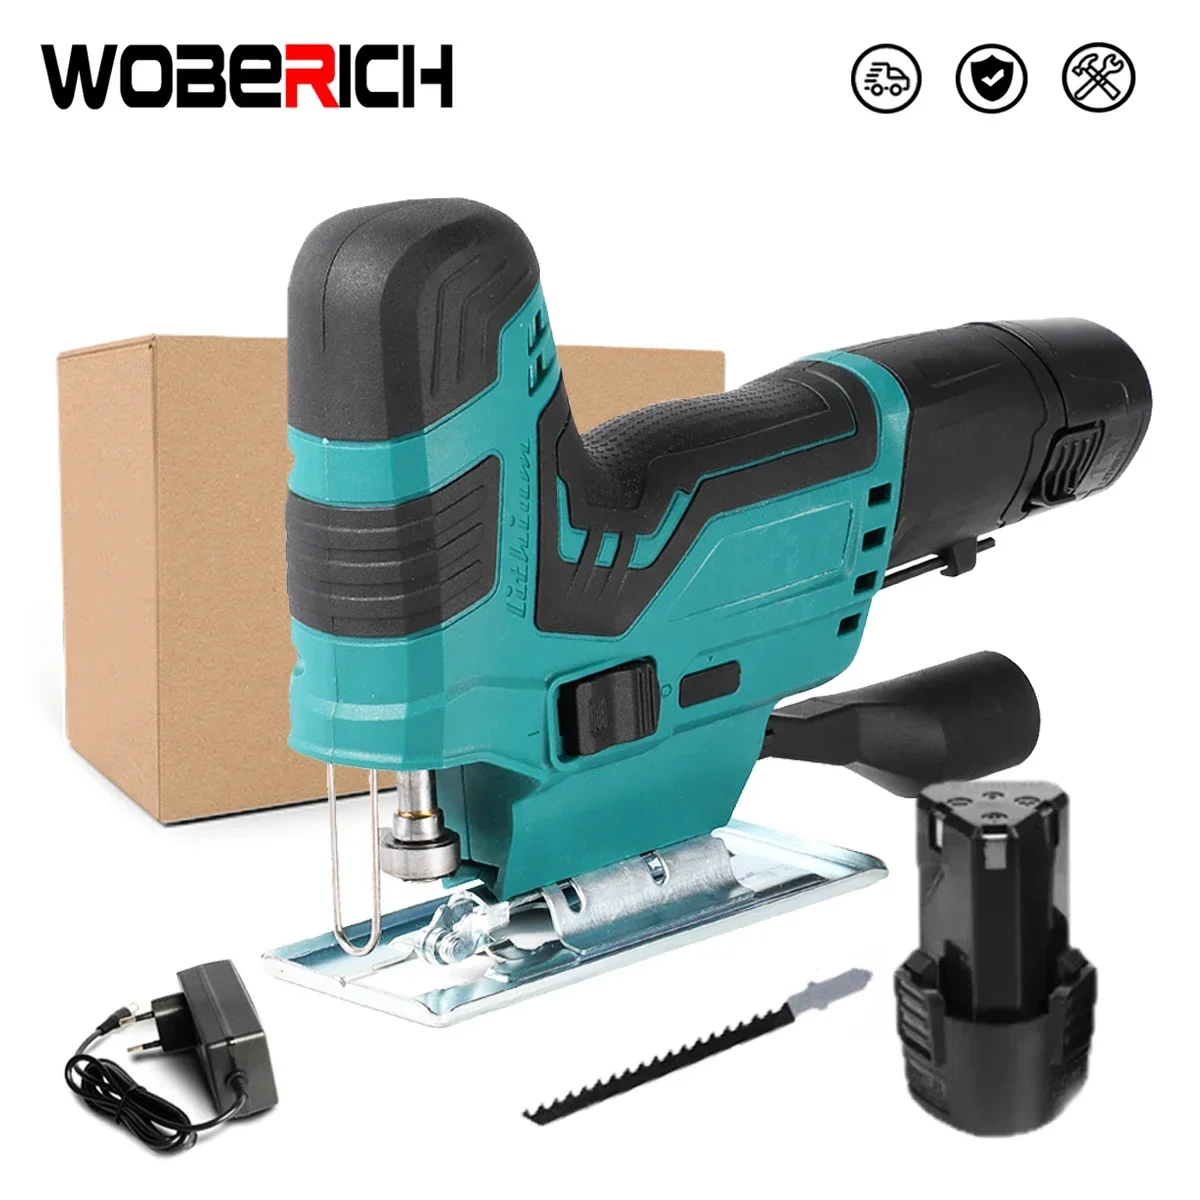 

12V Electrical Saw Electric Jigsaw Jig Saw for Woodworking Portable Multi-Function Woodworking Power Tool With Battery